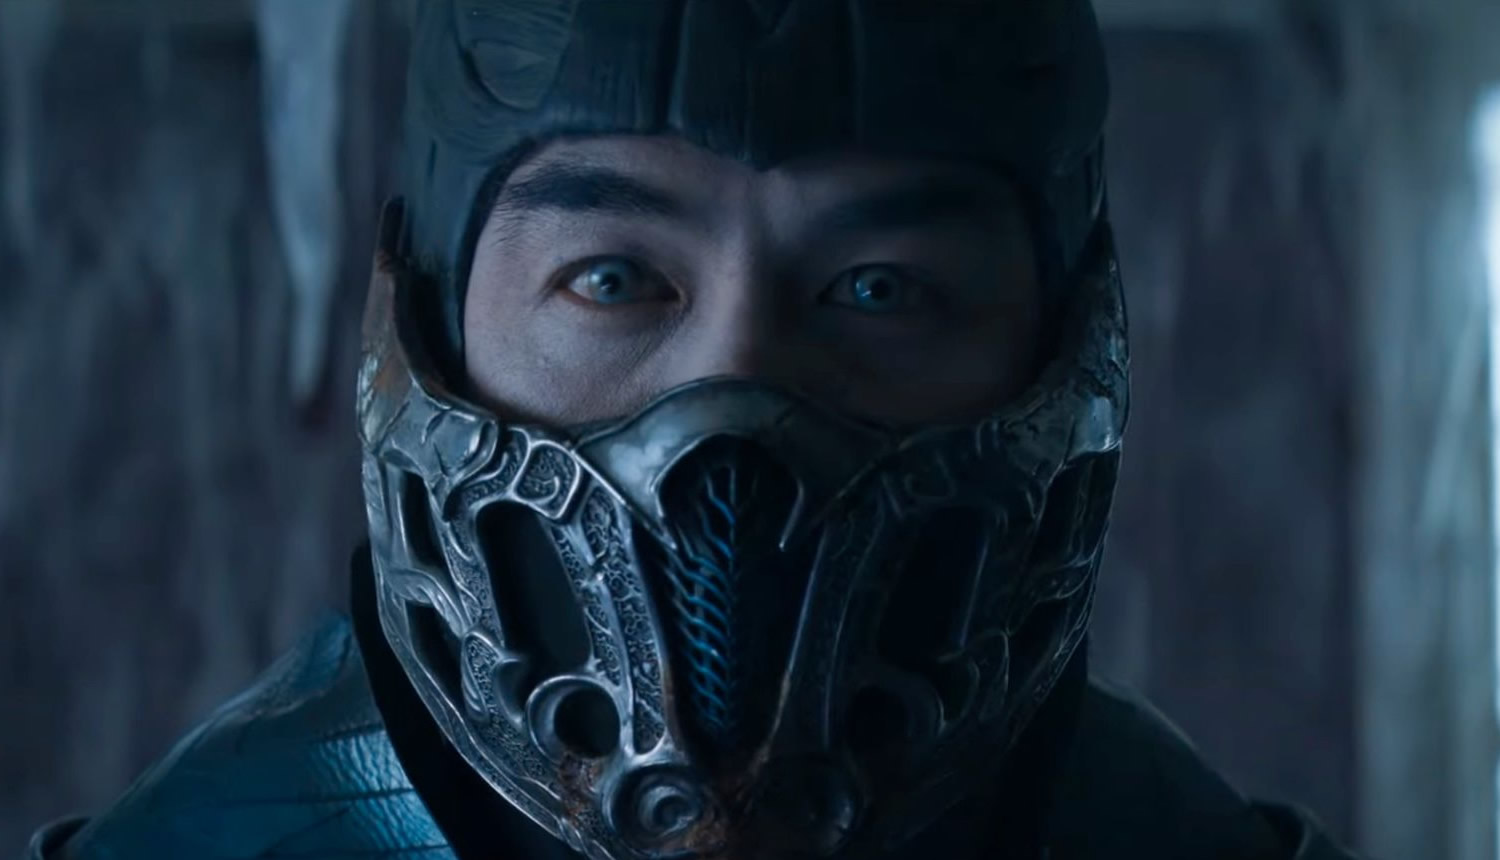 It's Good To See Mortal Kombat Movie Shang Tsung Back In Action